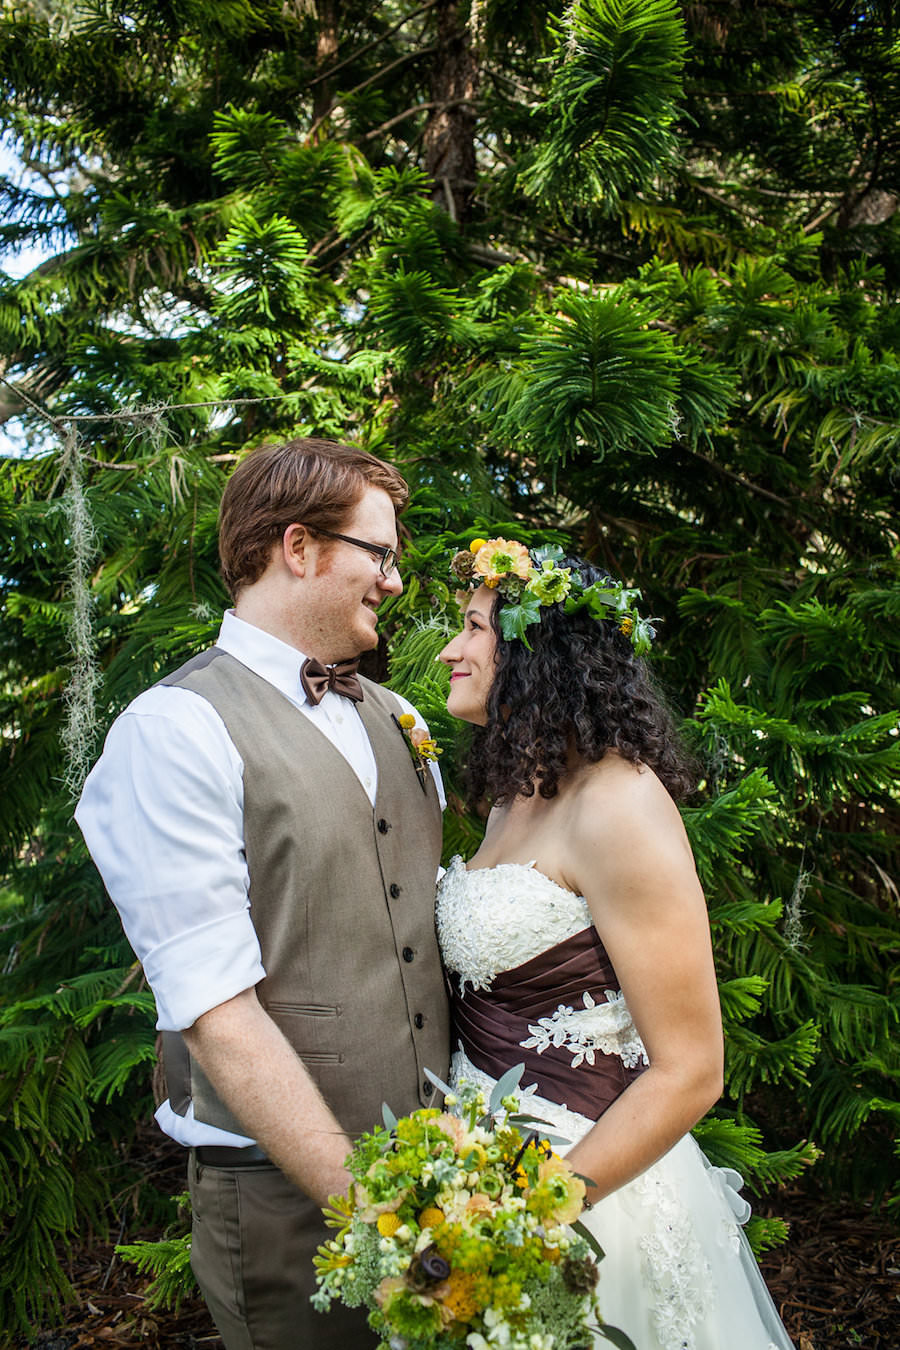 Bride and Groom, Outdoor Woods Wedding Portrait at St. Petersburg Lord of the Rings Inspired Wedding with White and Brown Wedding Dress and Yellow and Green Bouquet of Flowers and Flower Crown | St. Petersburg Wedding Florist Wonderland Floral Art and Gift Loft